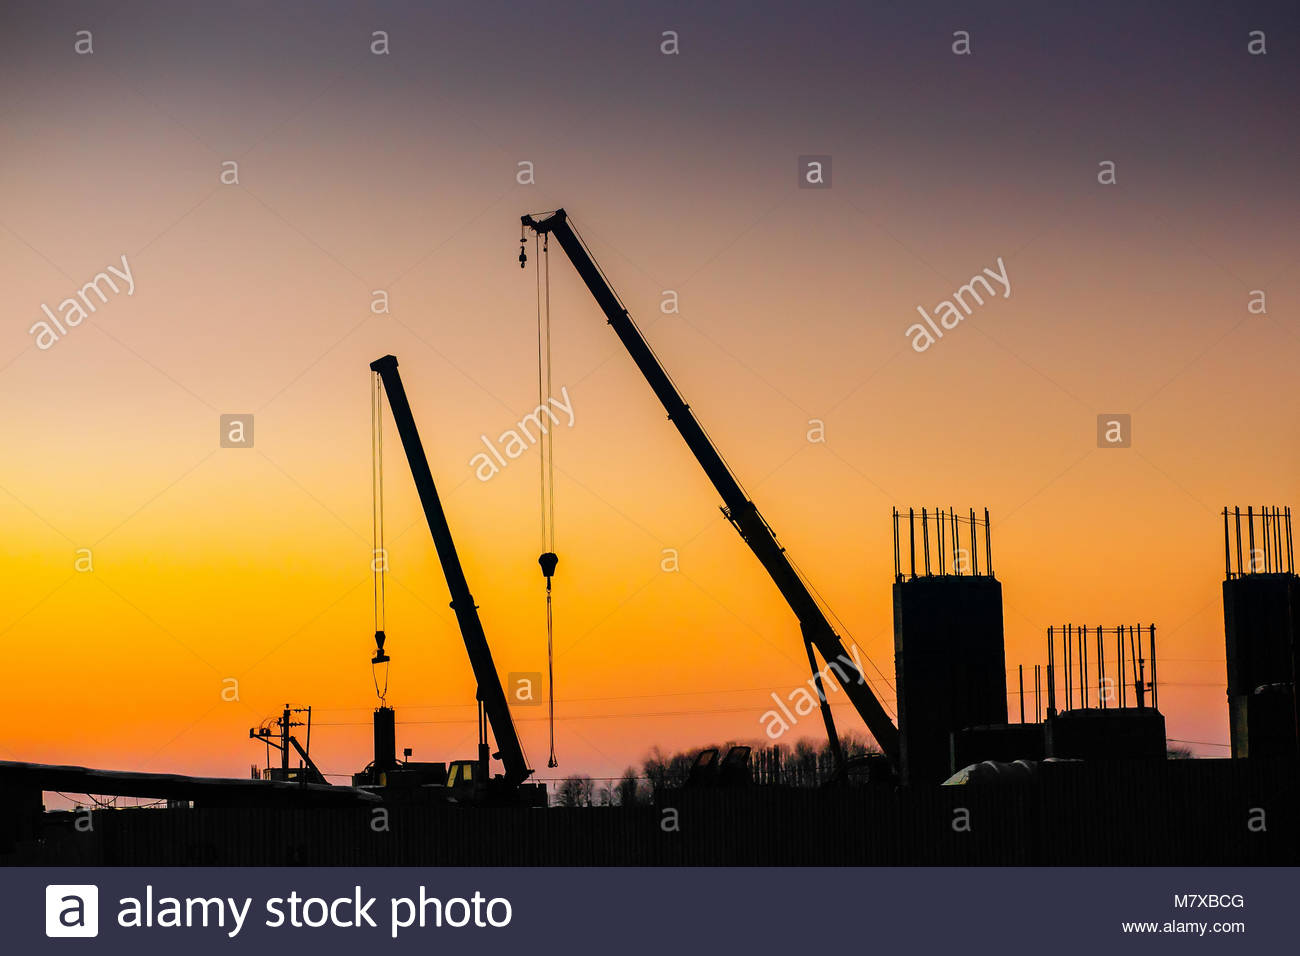 Crane And Building Construction Site On Background Of Sunset Sky